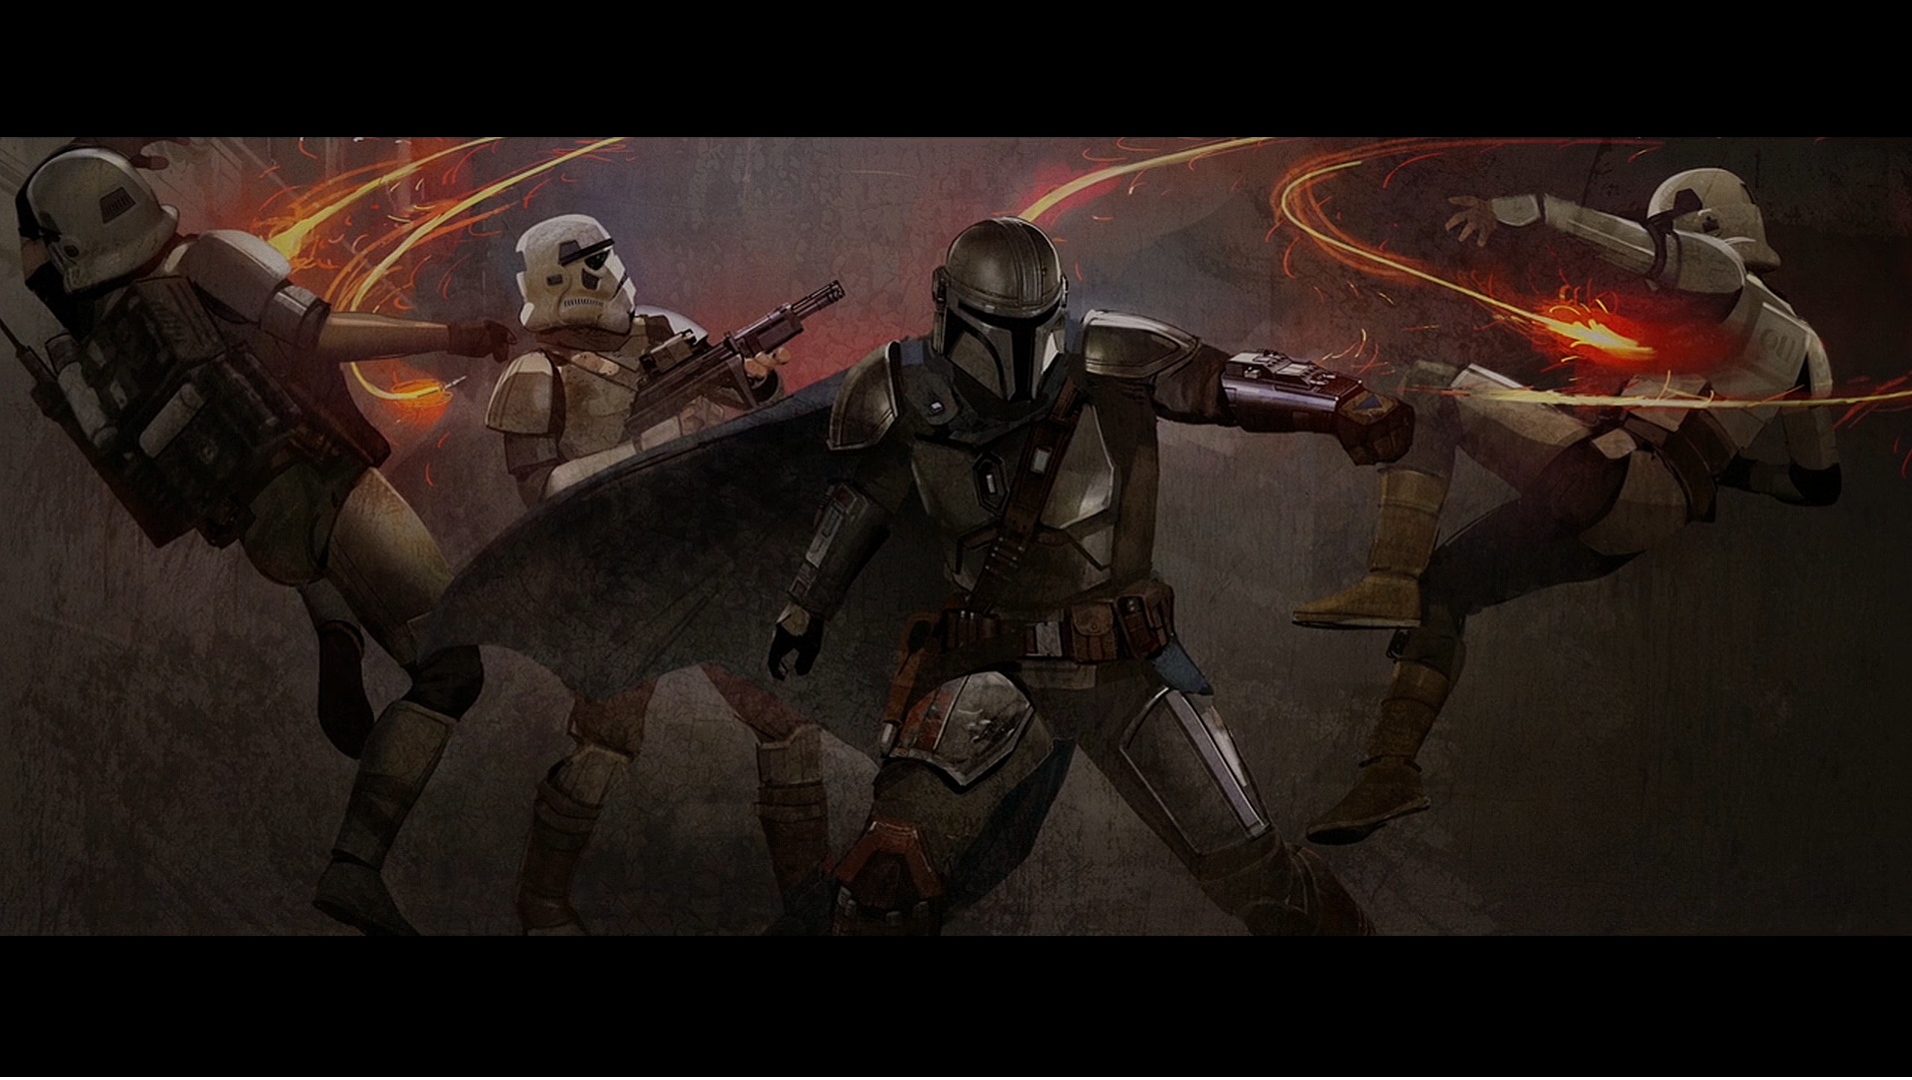 You can get some amazing desktop wallpaper or canvas prints from the end credits of Mandalorian!